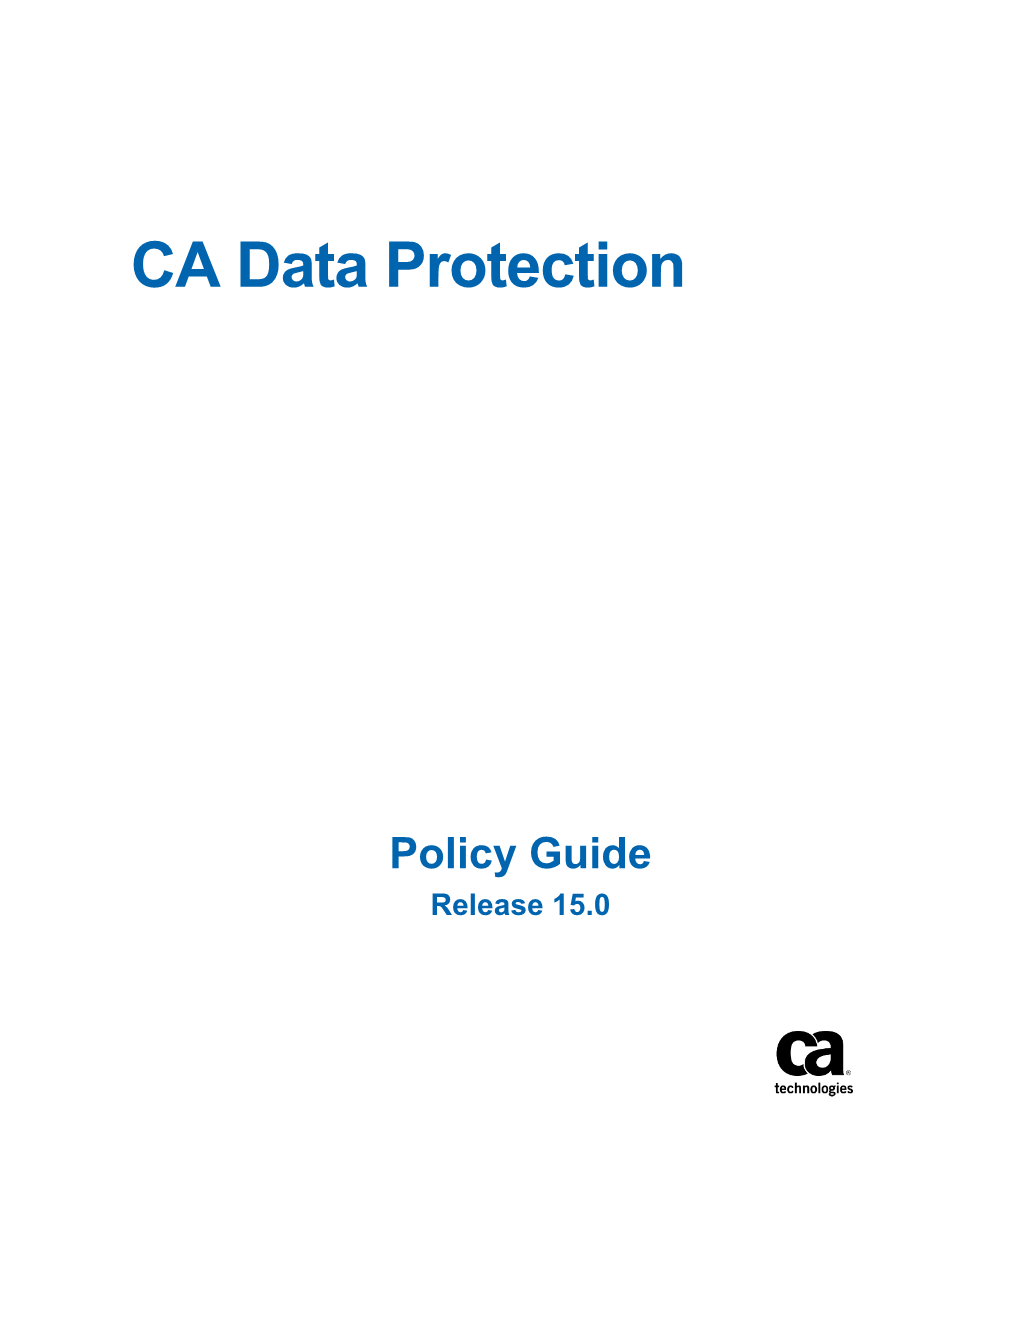 CA Data Protection Policy Guide